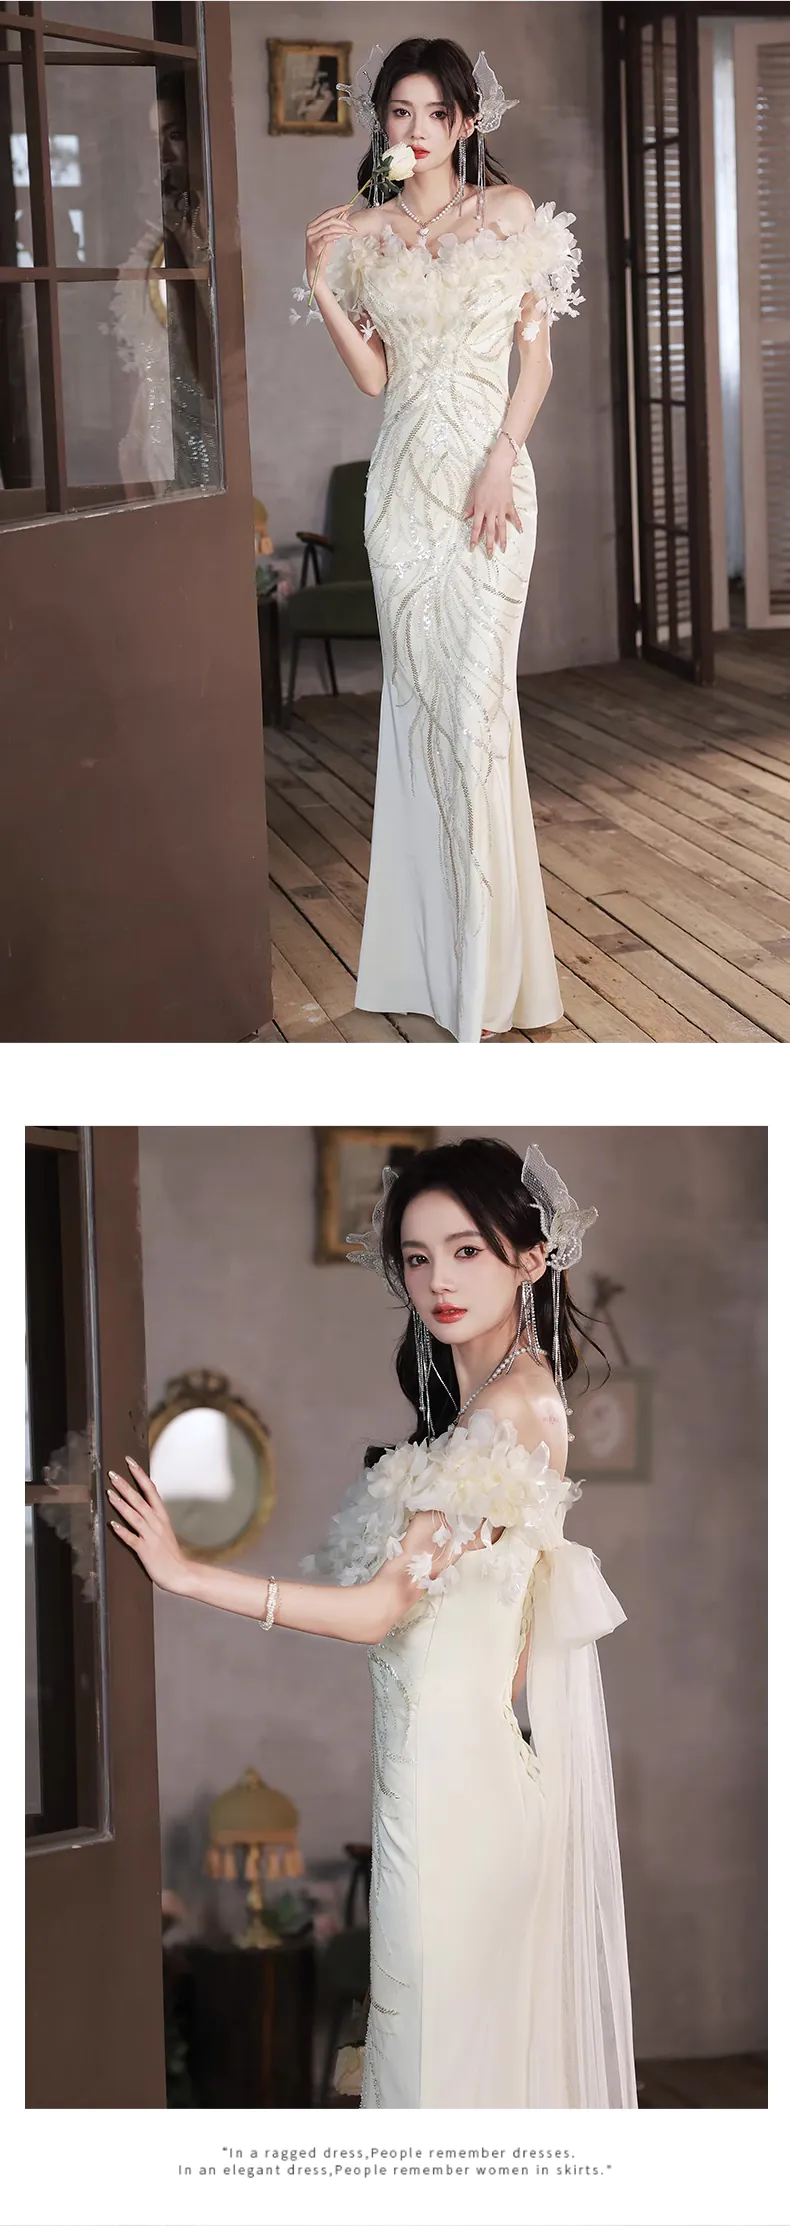 Fairy-Creamy-White-Off-the-Shoulder-Fishtail-Banquet-Prom-Party-Dress14